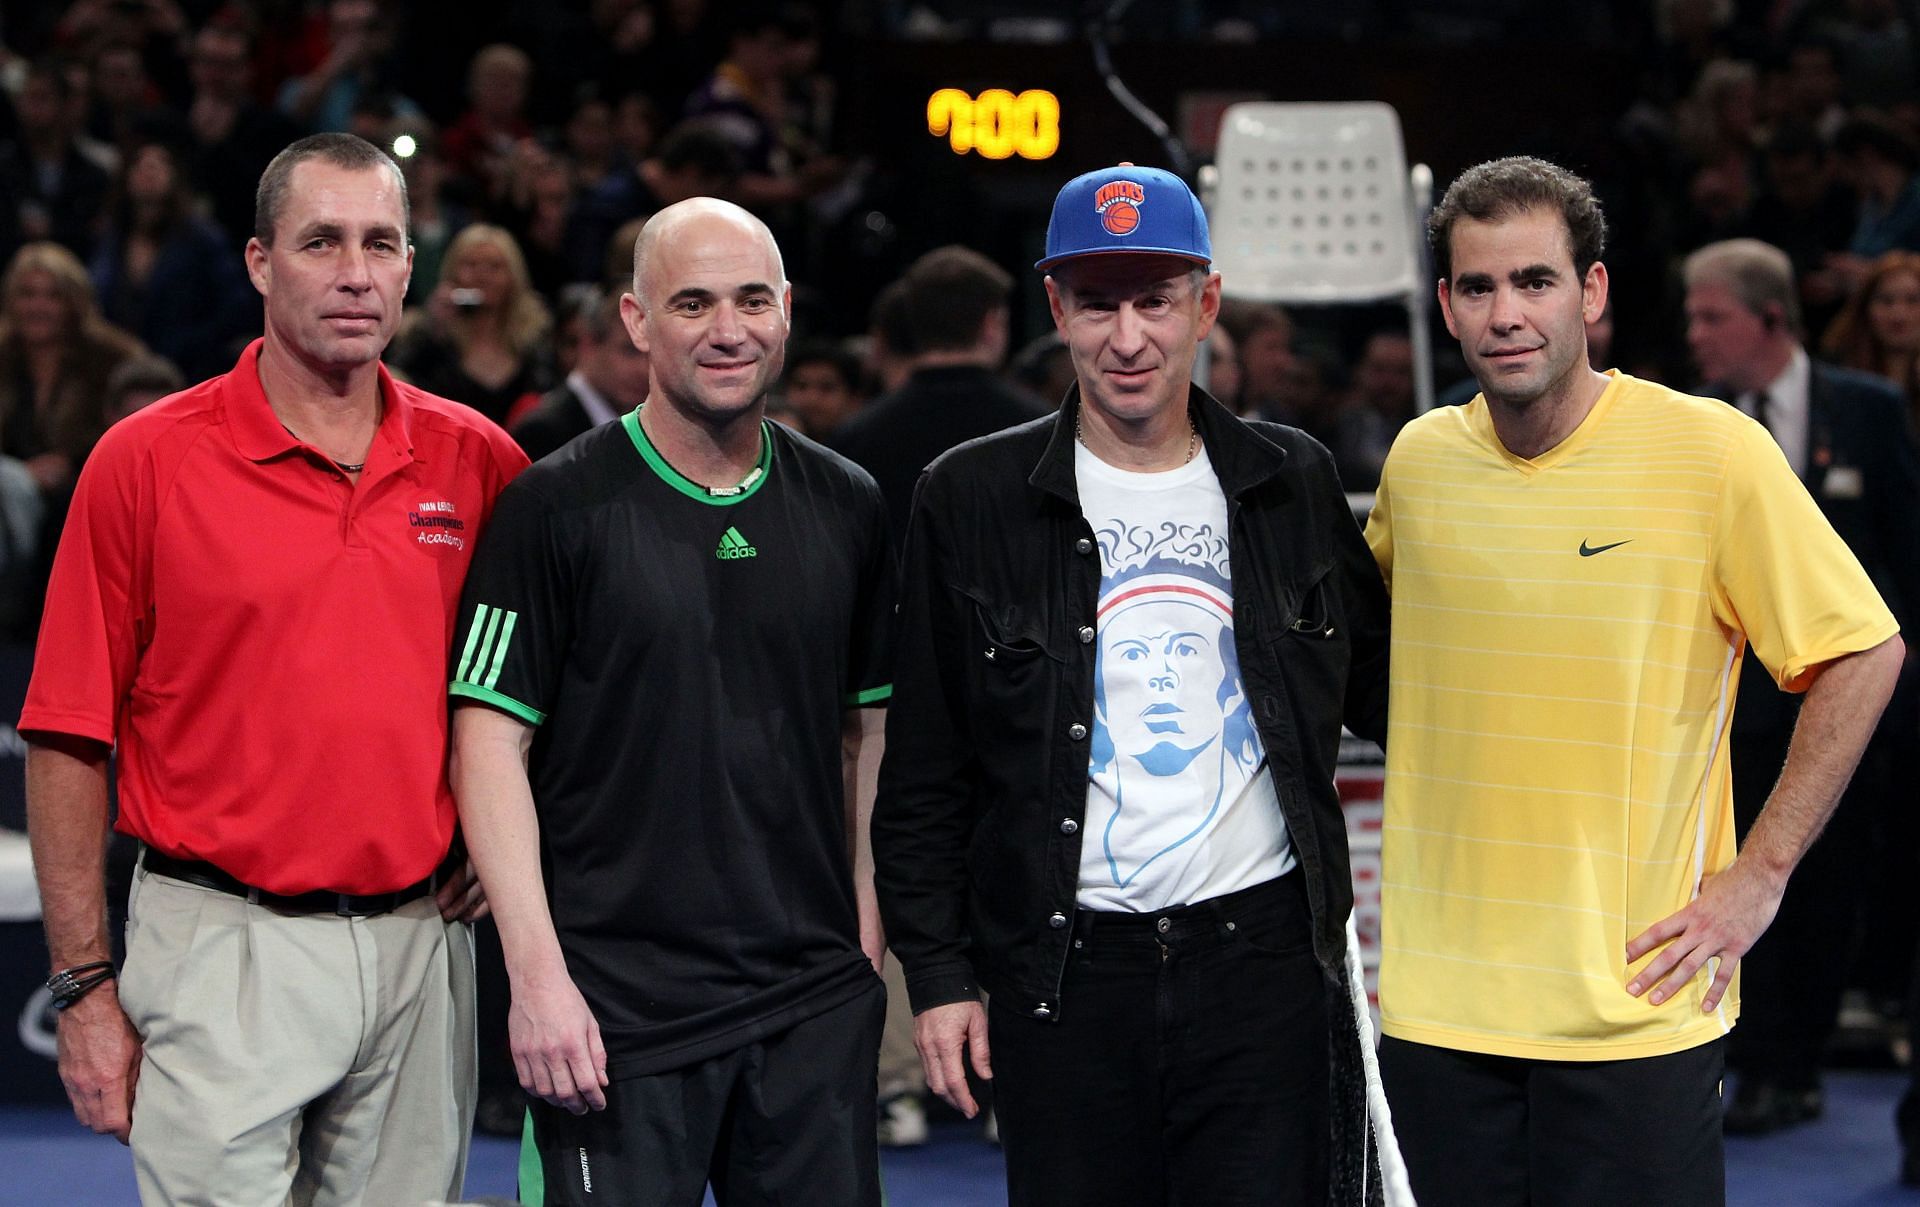 Andre Agassi and Pete Sampras with John McEnroe and Ivan Lendl